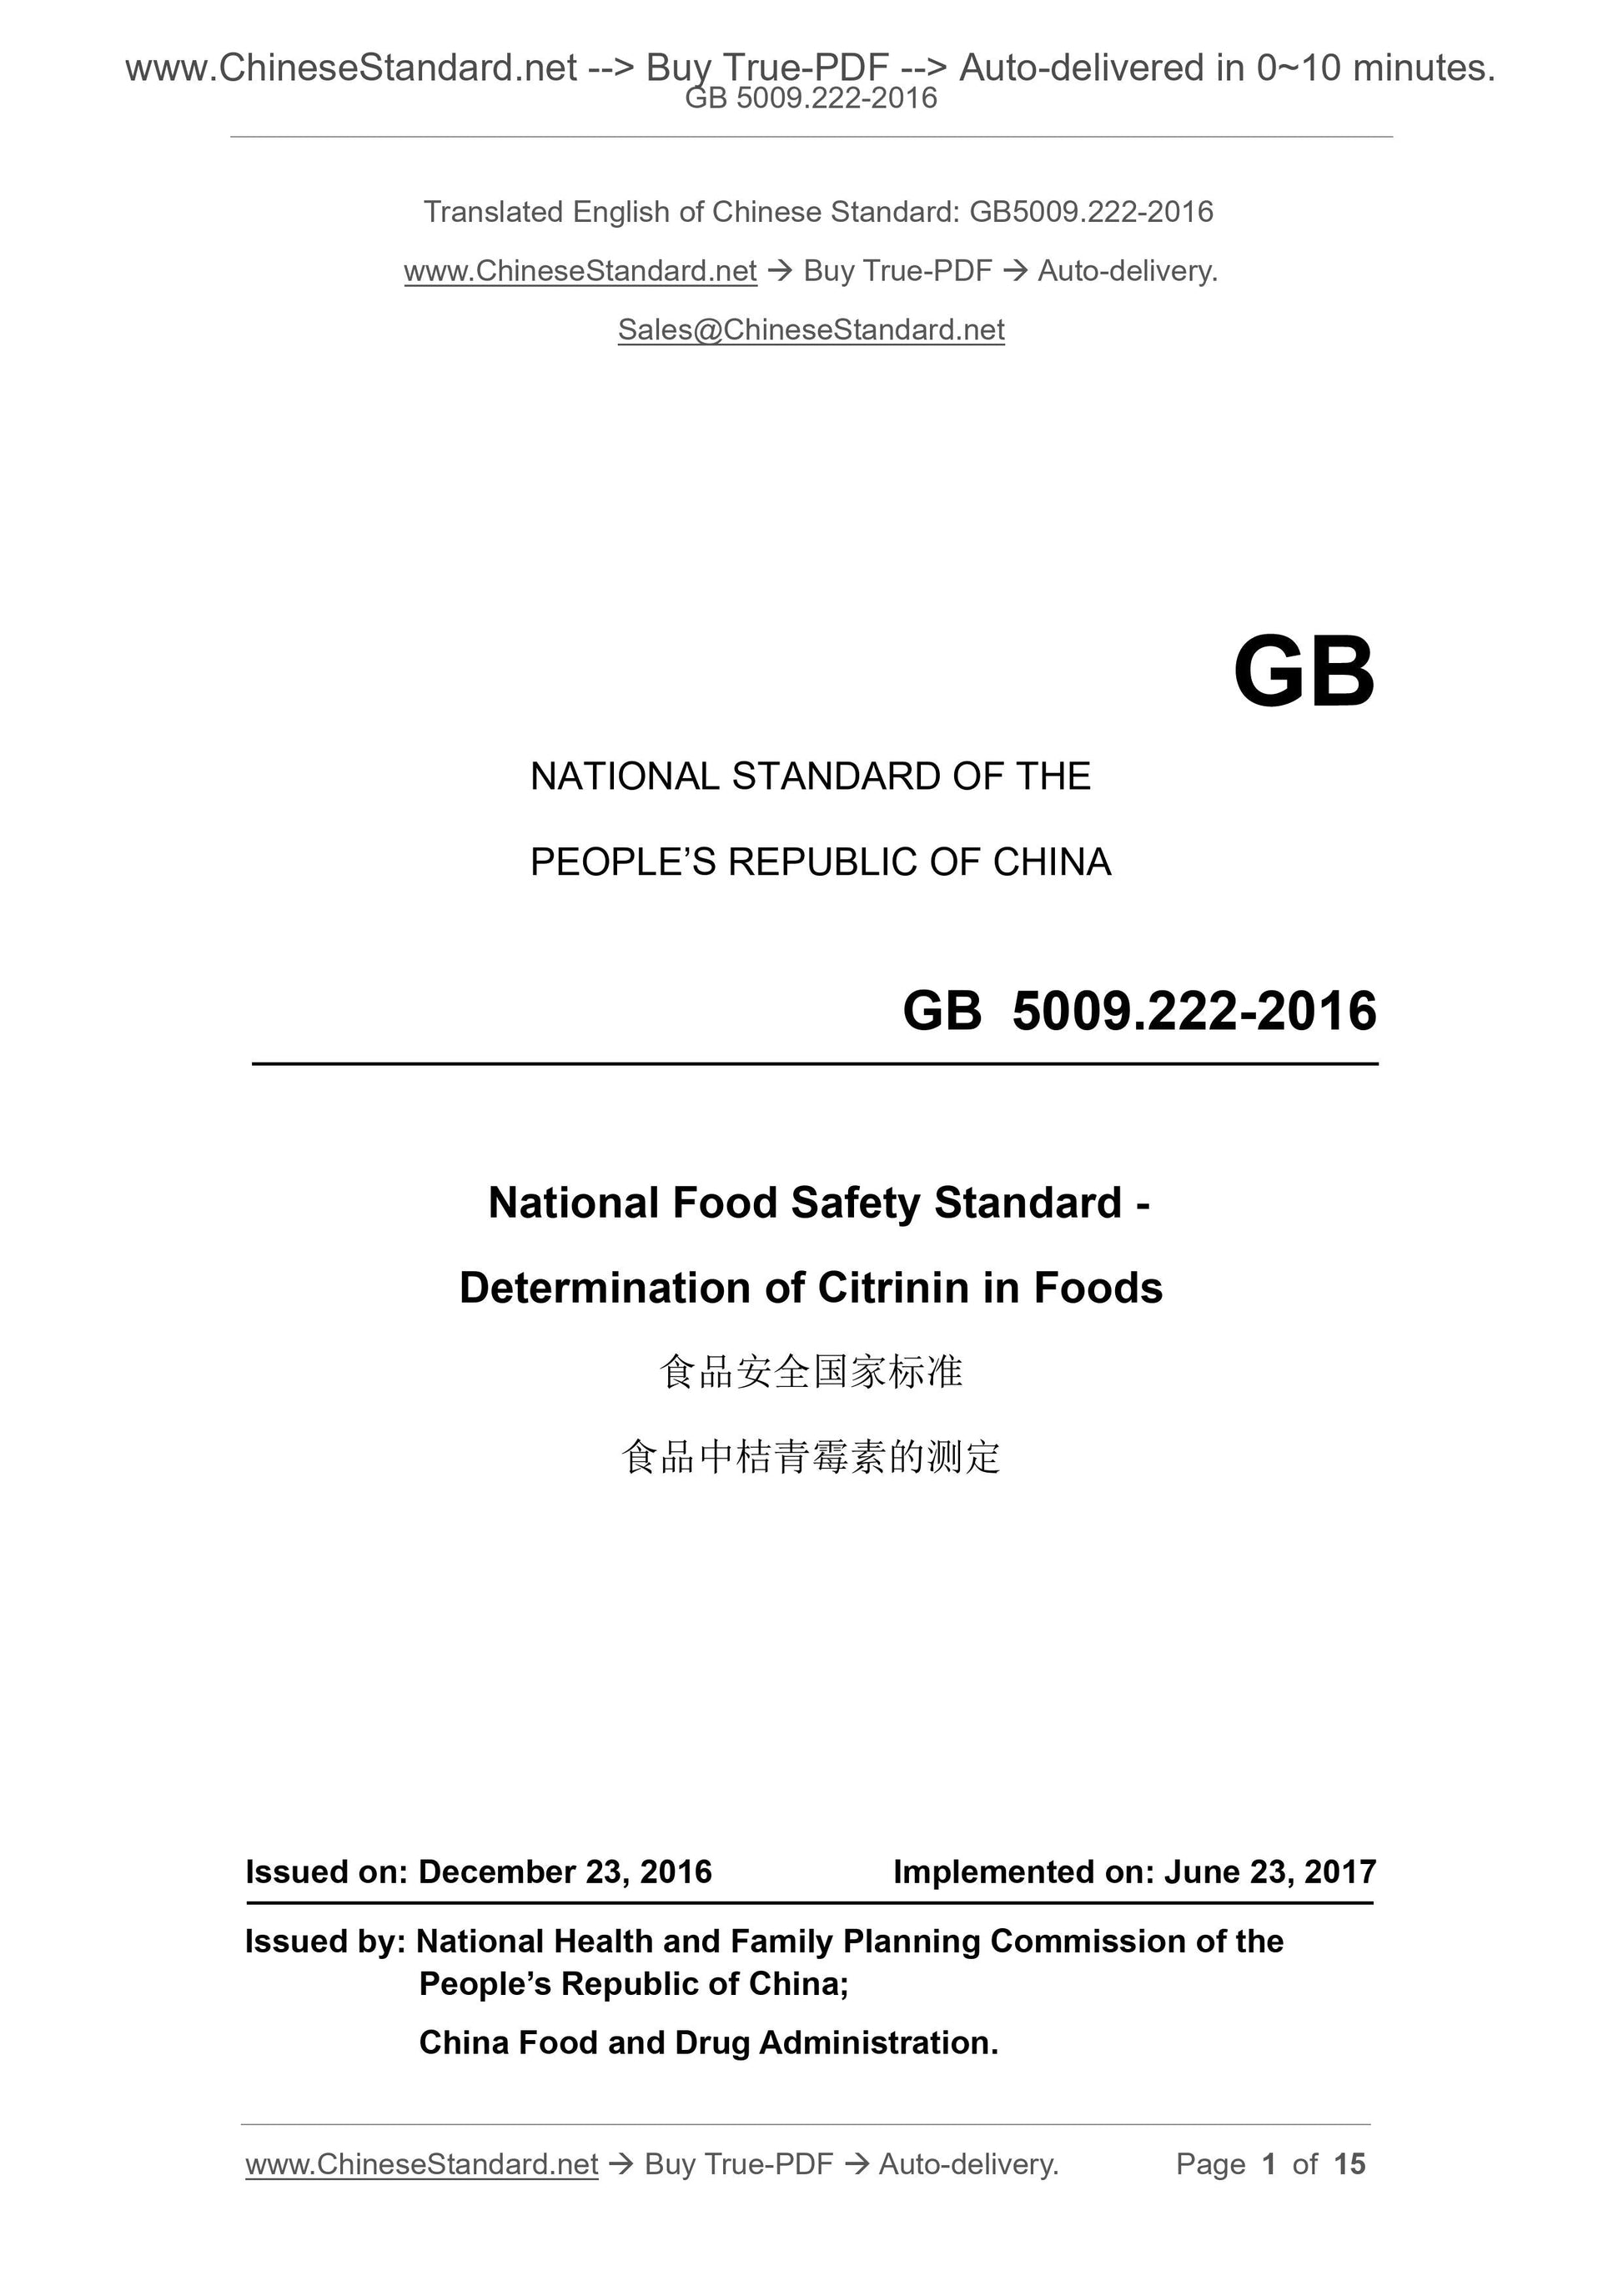 GB 5009.222-2016 Page 1